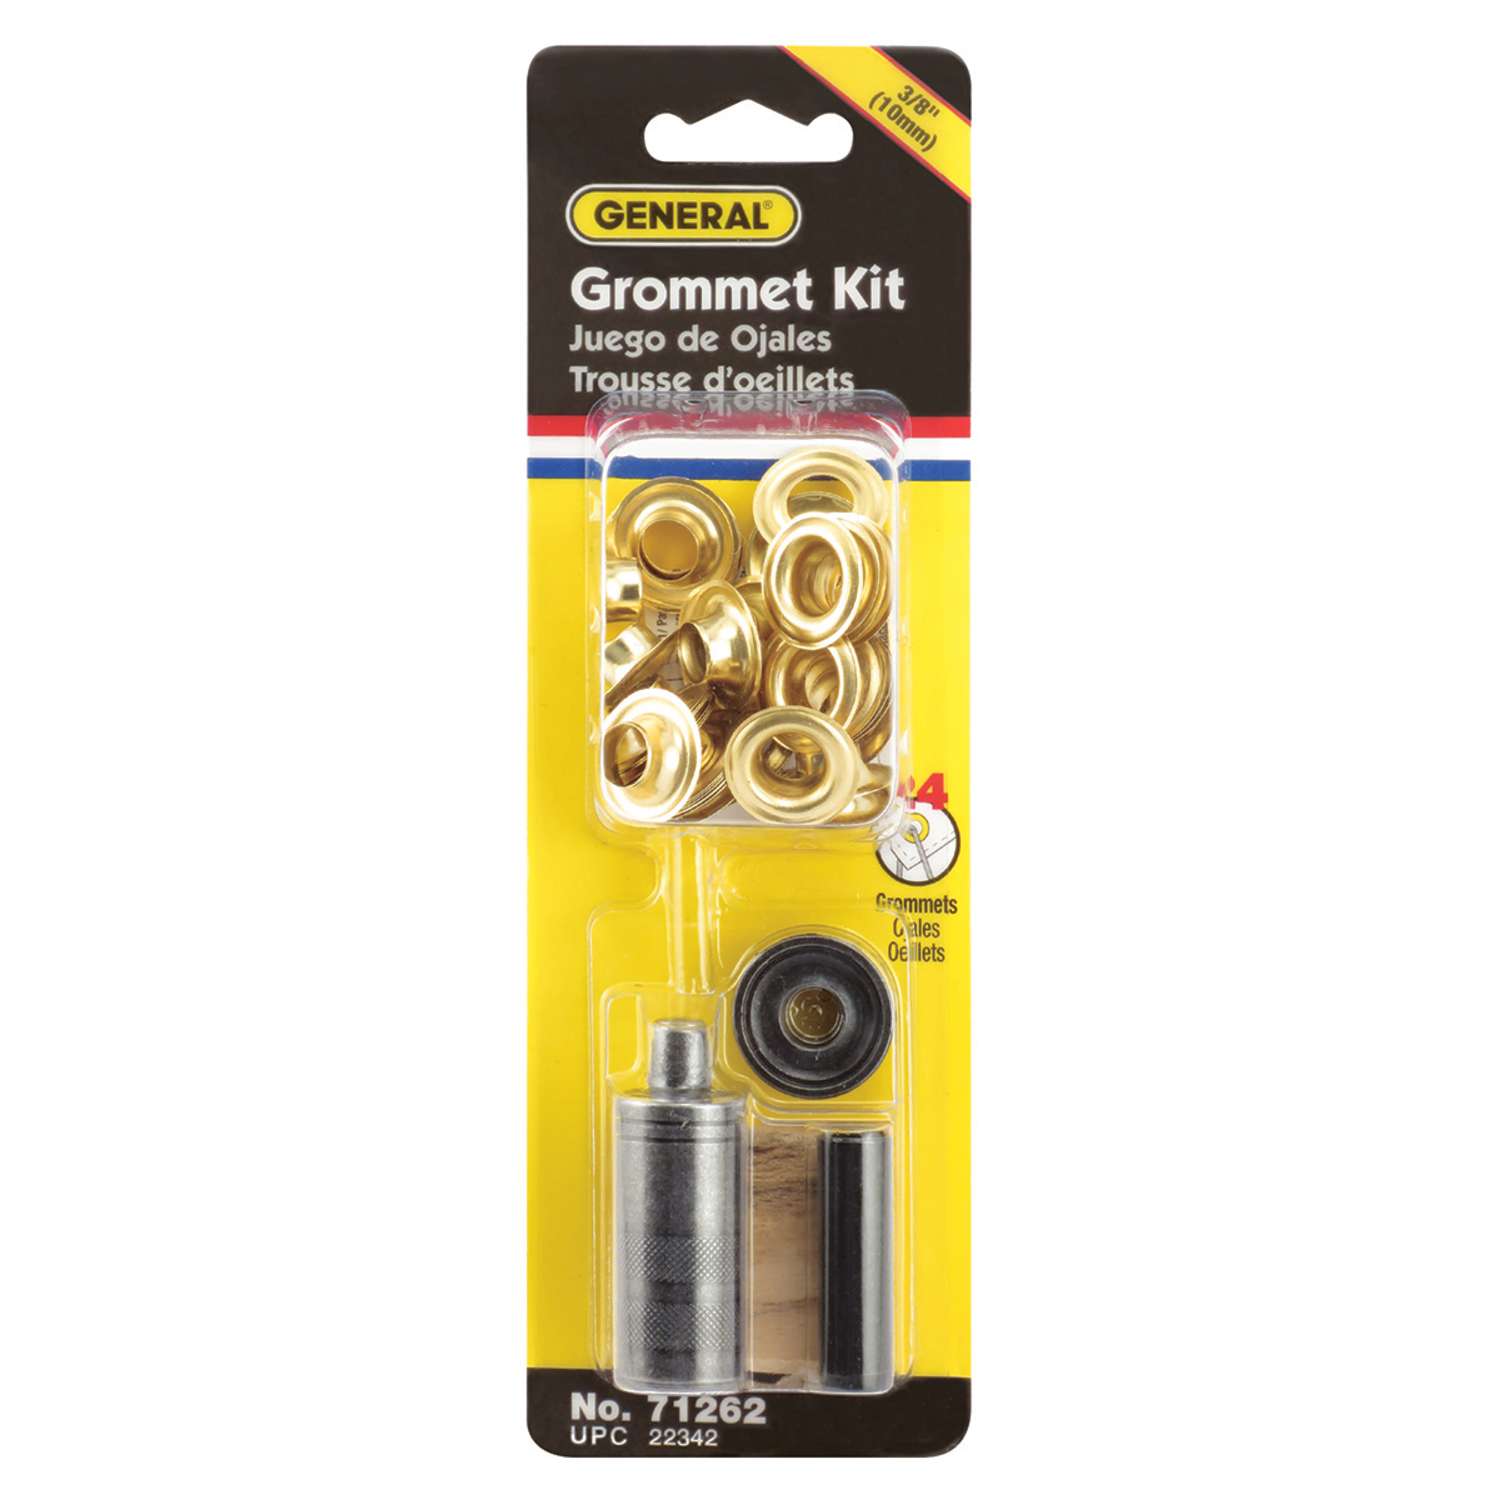 General Tools 1/2 Grommet Tool Kit - 12 Solid Brass Grommets for